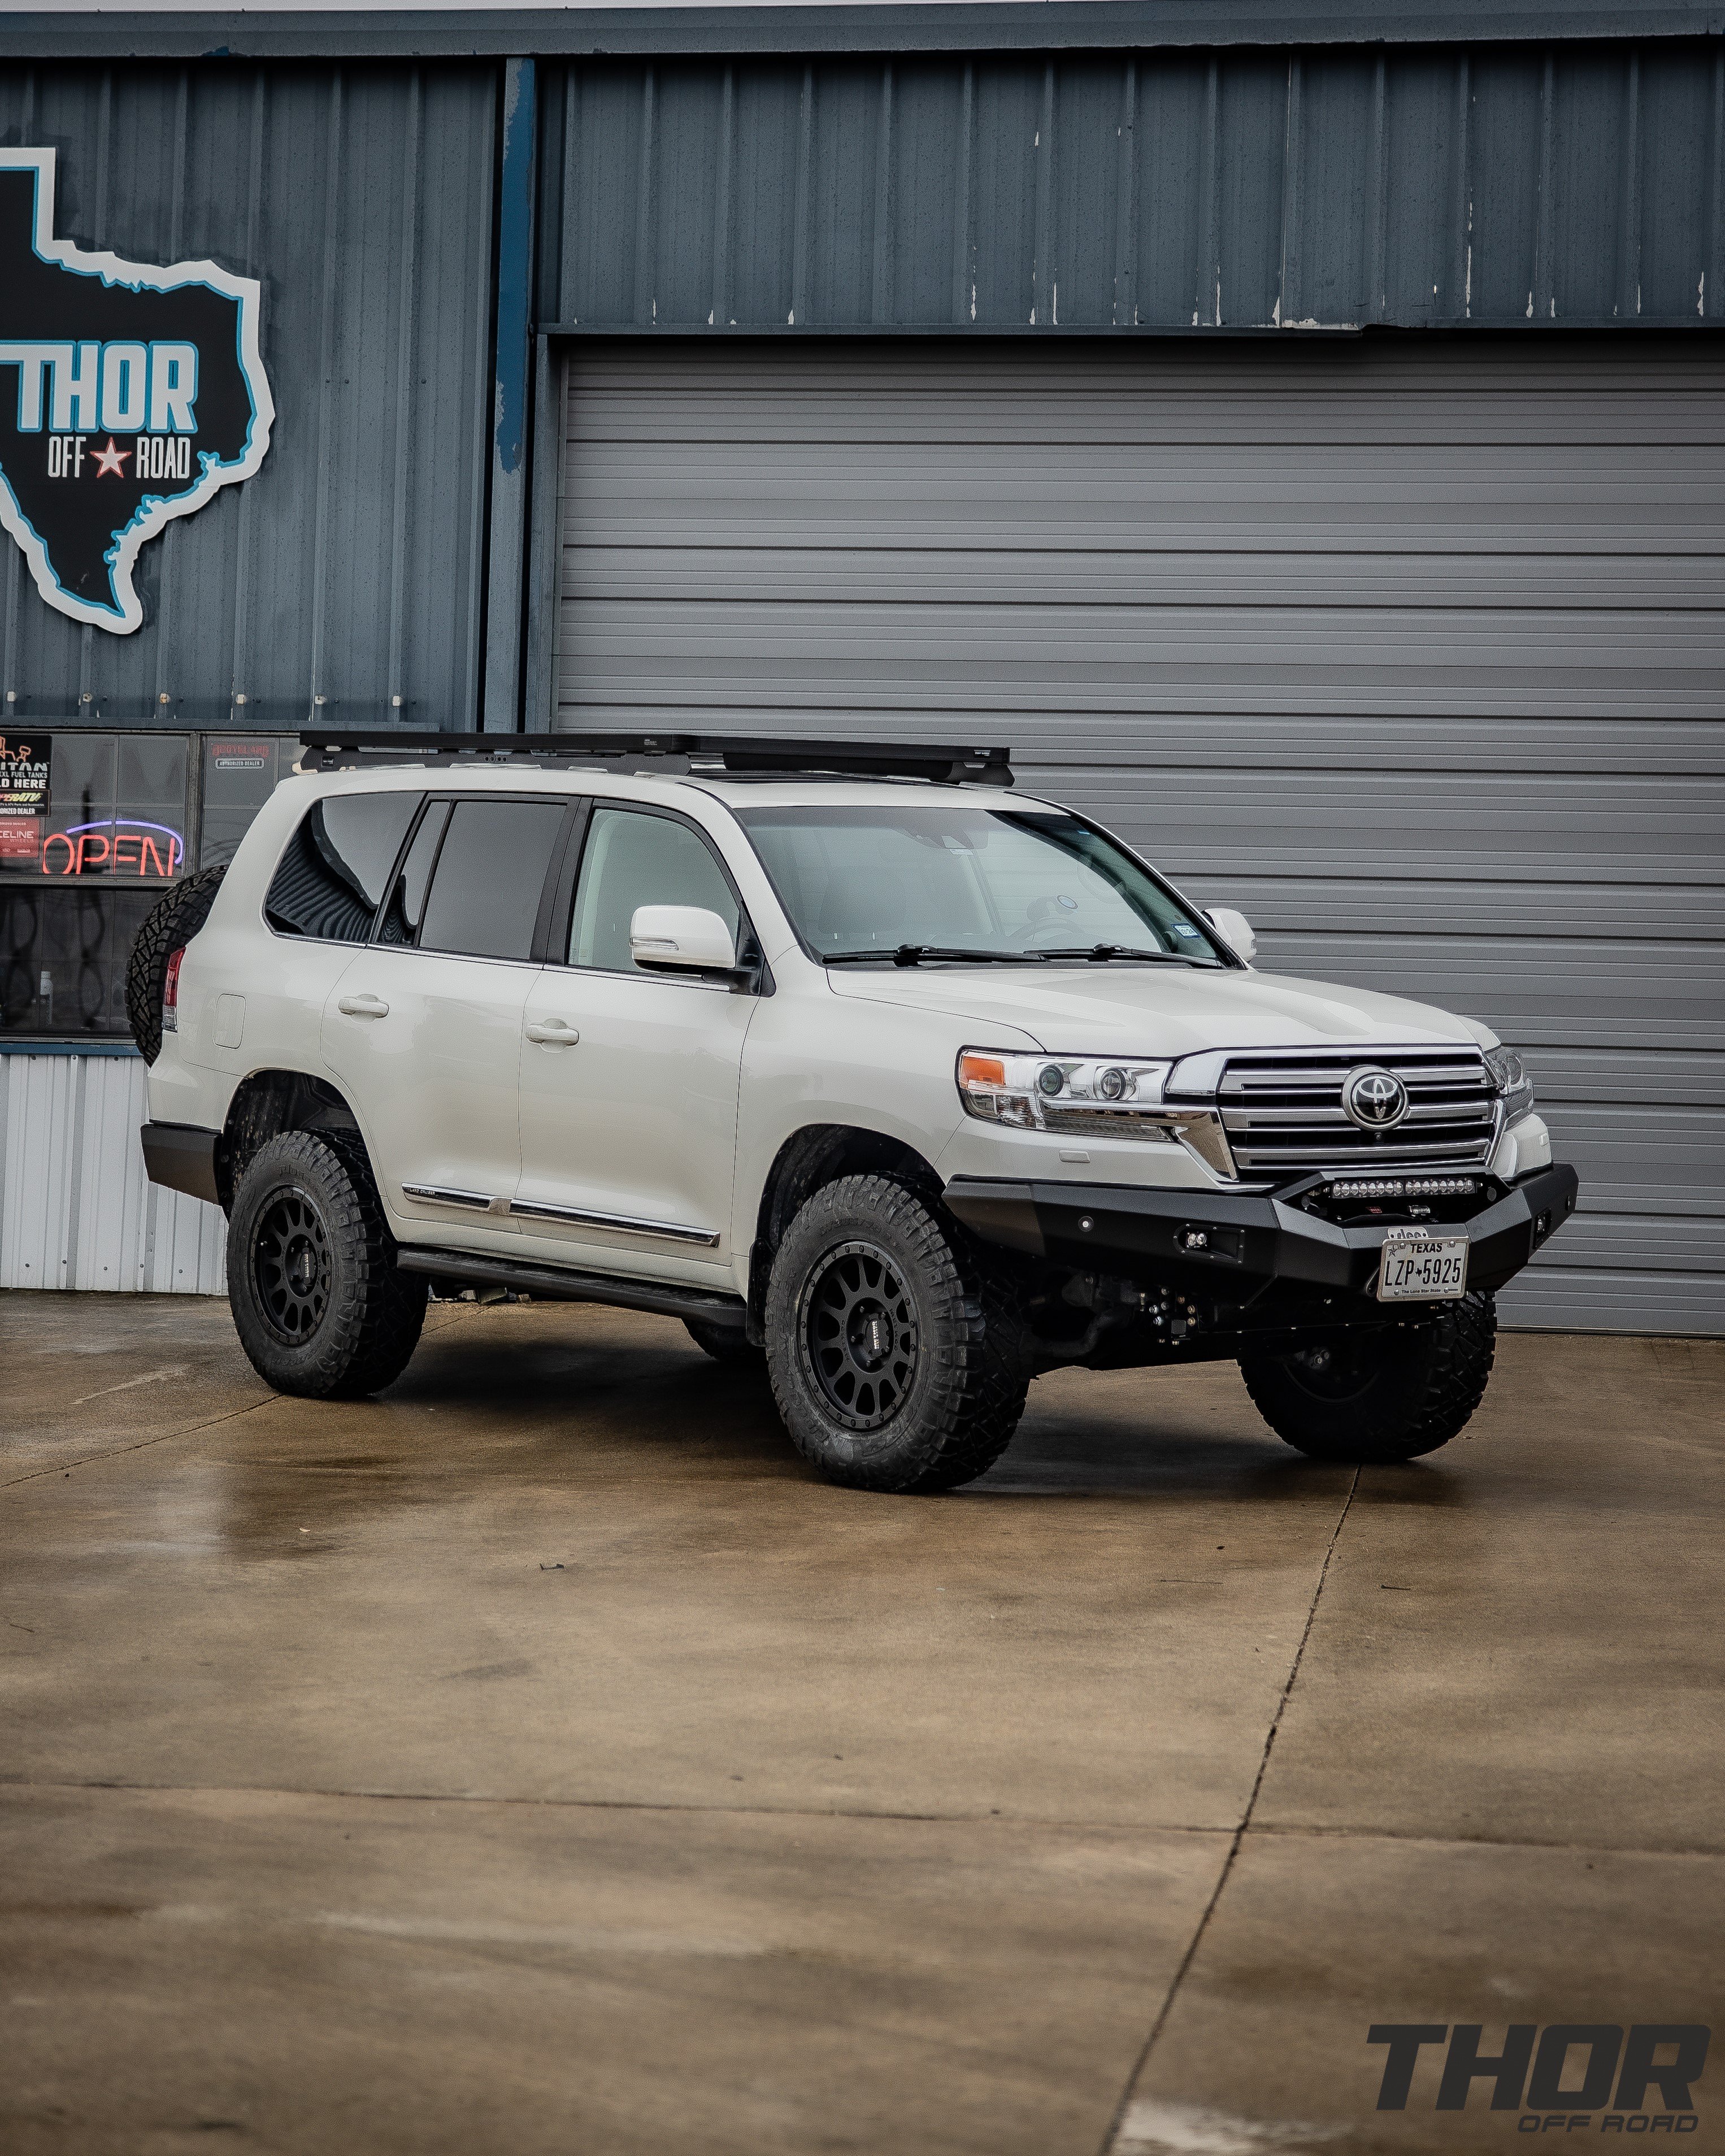 2021 Toyota Land Cruiser in Silver with OME BP-51 Suspension Kit, Method 305 18x9" +25 Wheels, Nitto Ridge Grappler 285/70R18 Tires, Slee Off-Road Front Bumper, Baja Designs S2 Driving Lights, Baja Designs S8 20" Combo Light Bar, Warn Zeon 12S Winch, Slee Off-Road Rear Bumper with Tire Carrier and Roof Rack, Long Range America 40 Gallon Auxillary Fuel Tank, Slee Off-Road Rock Sliders, Front Runner Slimline II Roof Rack Kit. Slee Off-Road Skid Plate System, Slee Off-Road Second Battery System, ARB Twin Compressor Kit